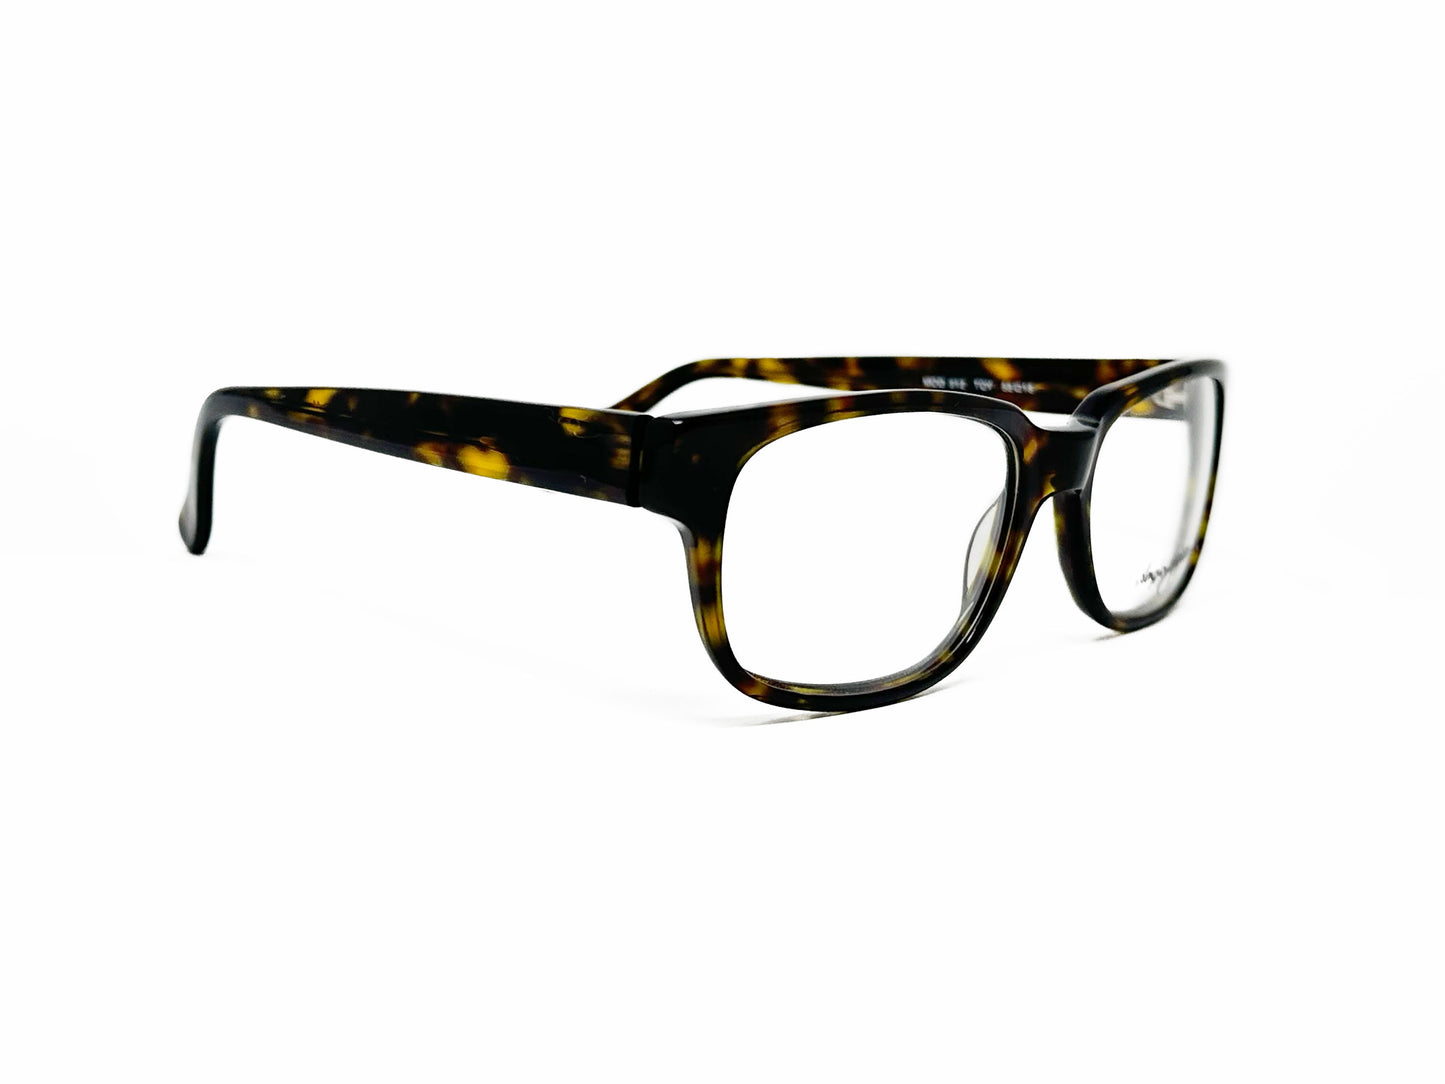 Anglo Americal Optical square acetate frame. Model: 312. Color: TOY tortoise. Side view